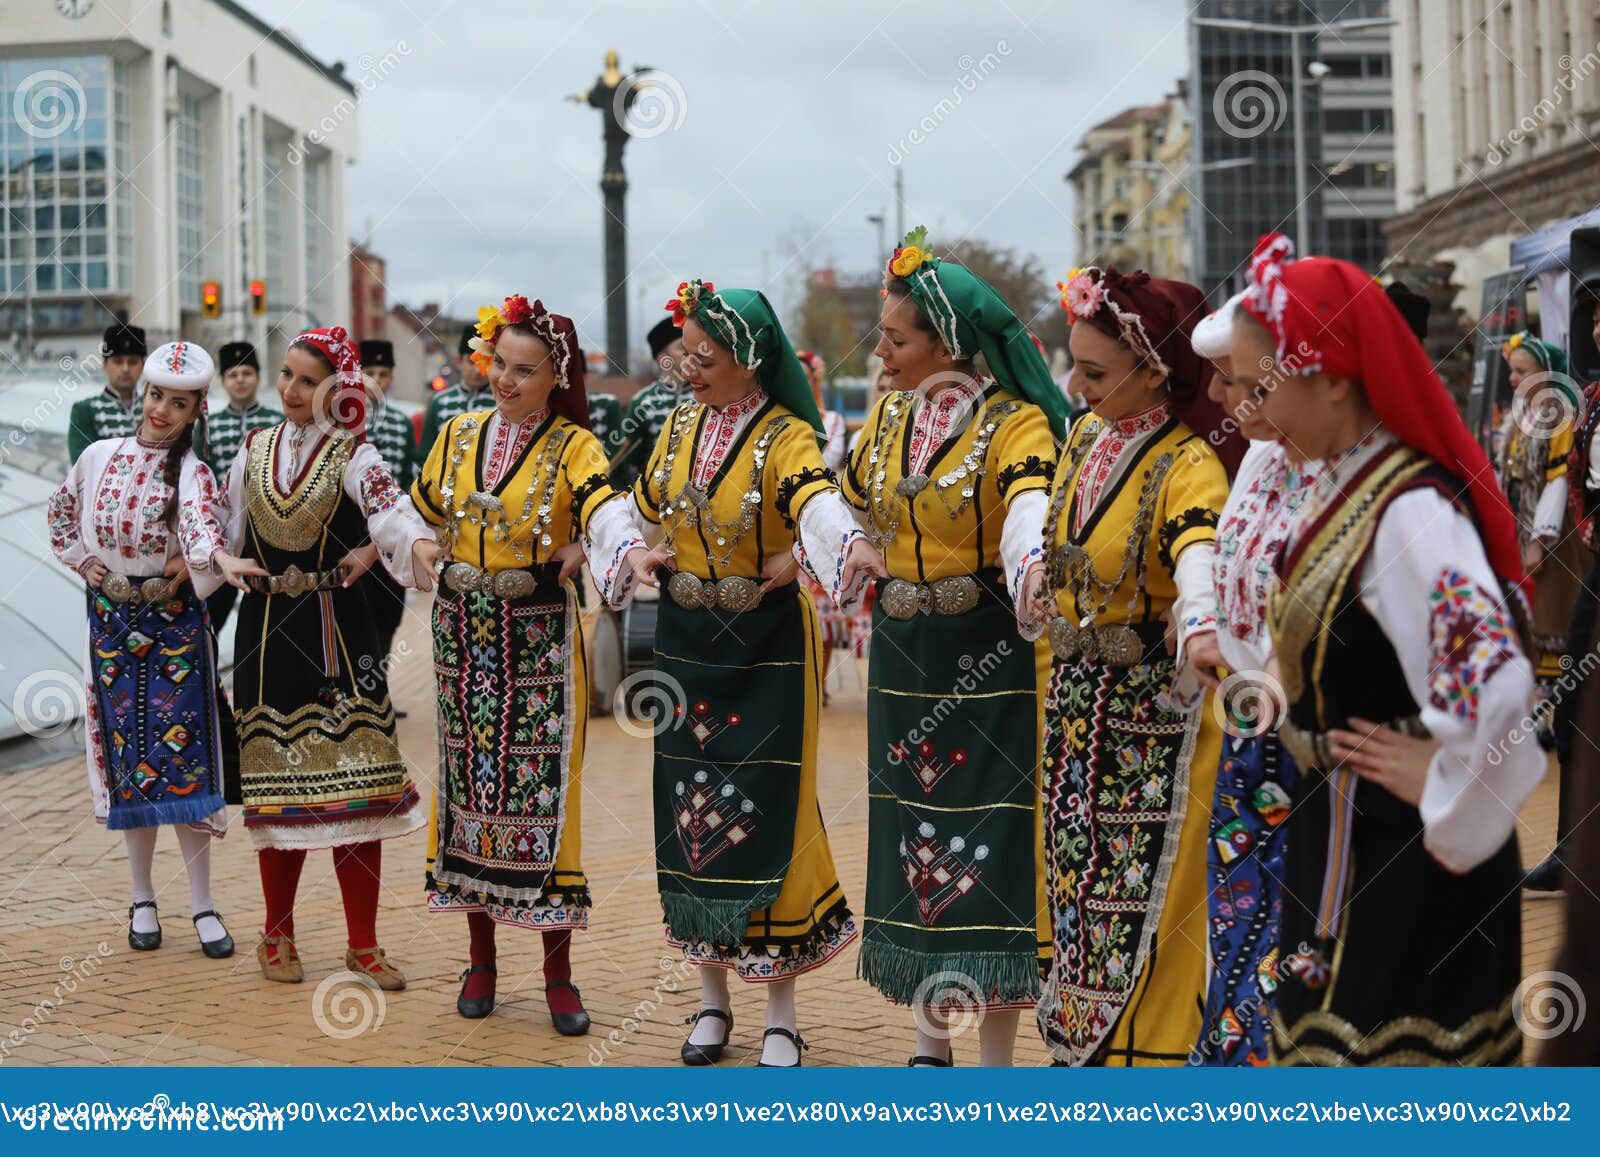 Communist Piglet Spelling People in Traditional Folk Costumes Perform the Bulgarian Folk Dance  Editorial Photography - Image of dress, music: 216623817